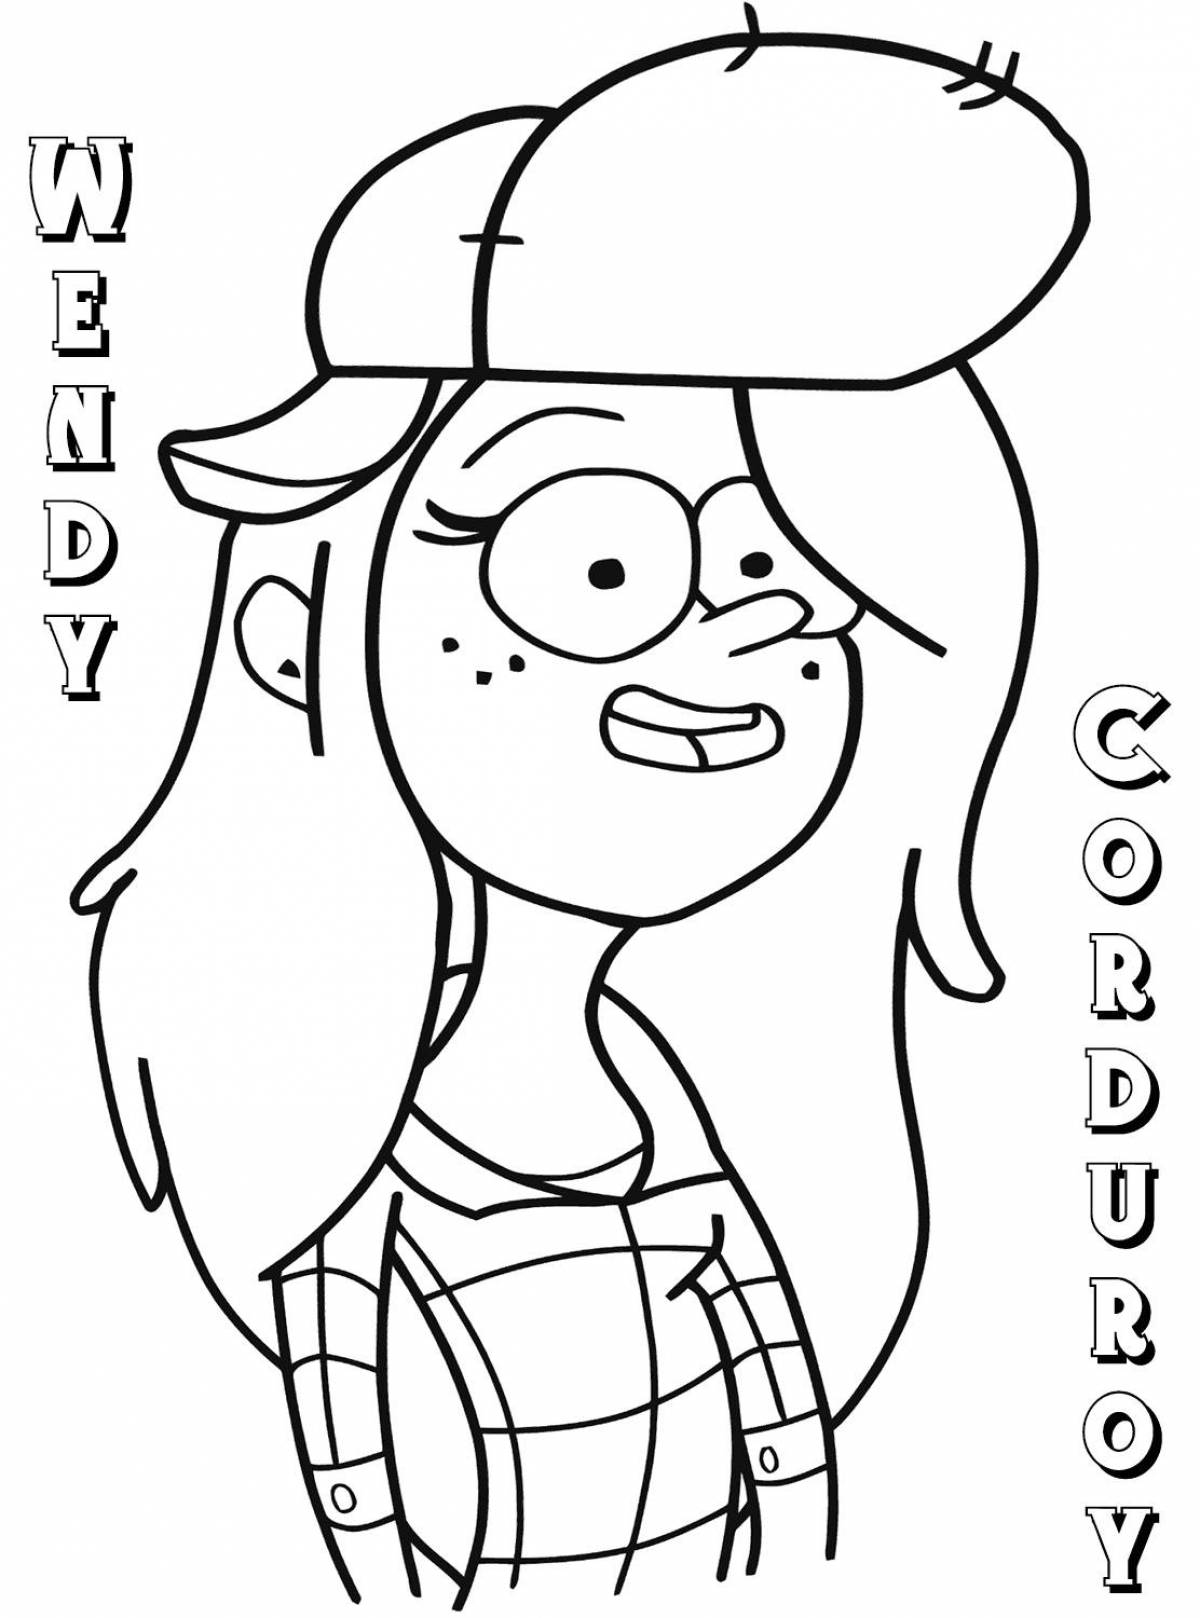 Wendy's adorable coloring page